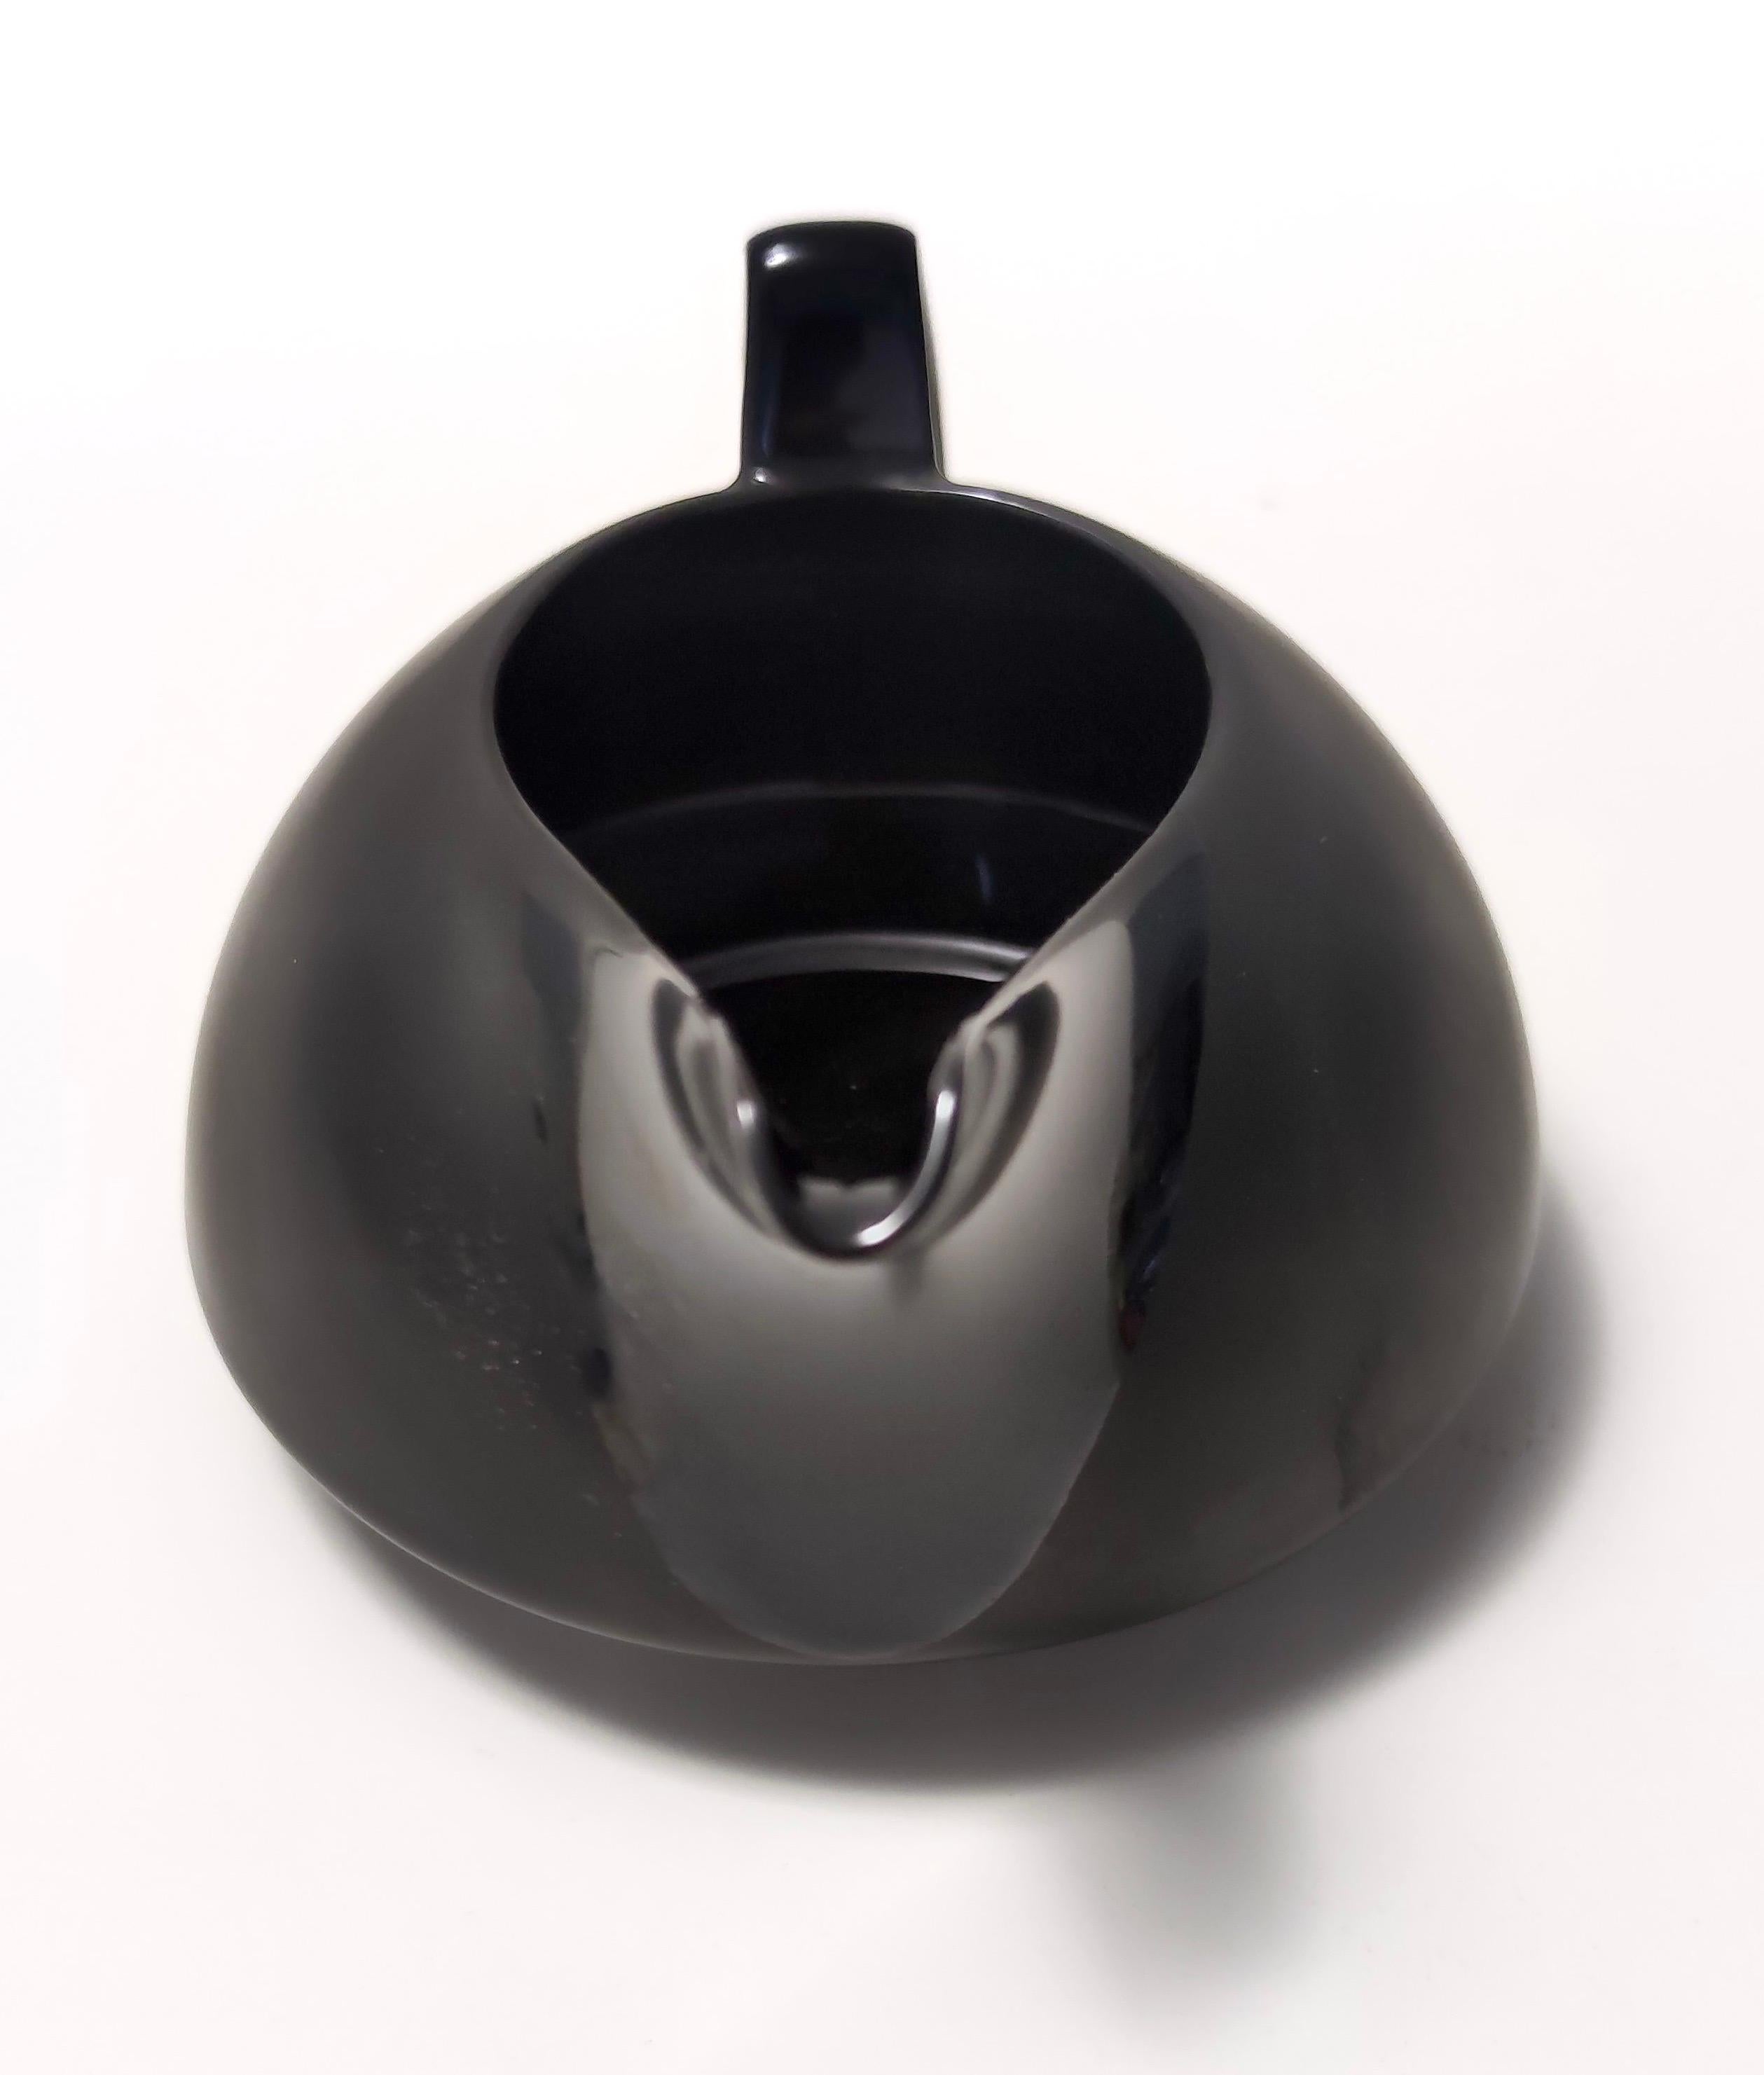 Vintage Black Glazed Porcelain Milk Jug by Walter Gropius for Rosenthal In Excellent Condition For Sale In Bresso, Lombardy